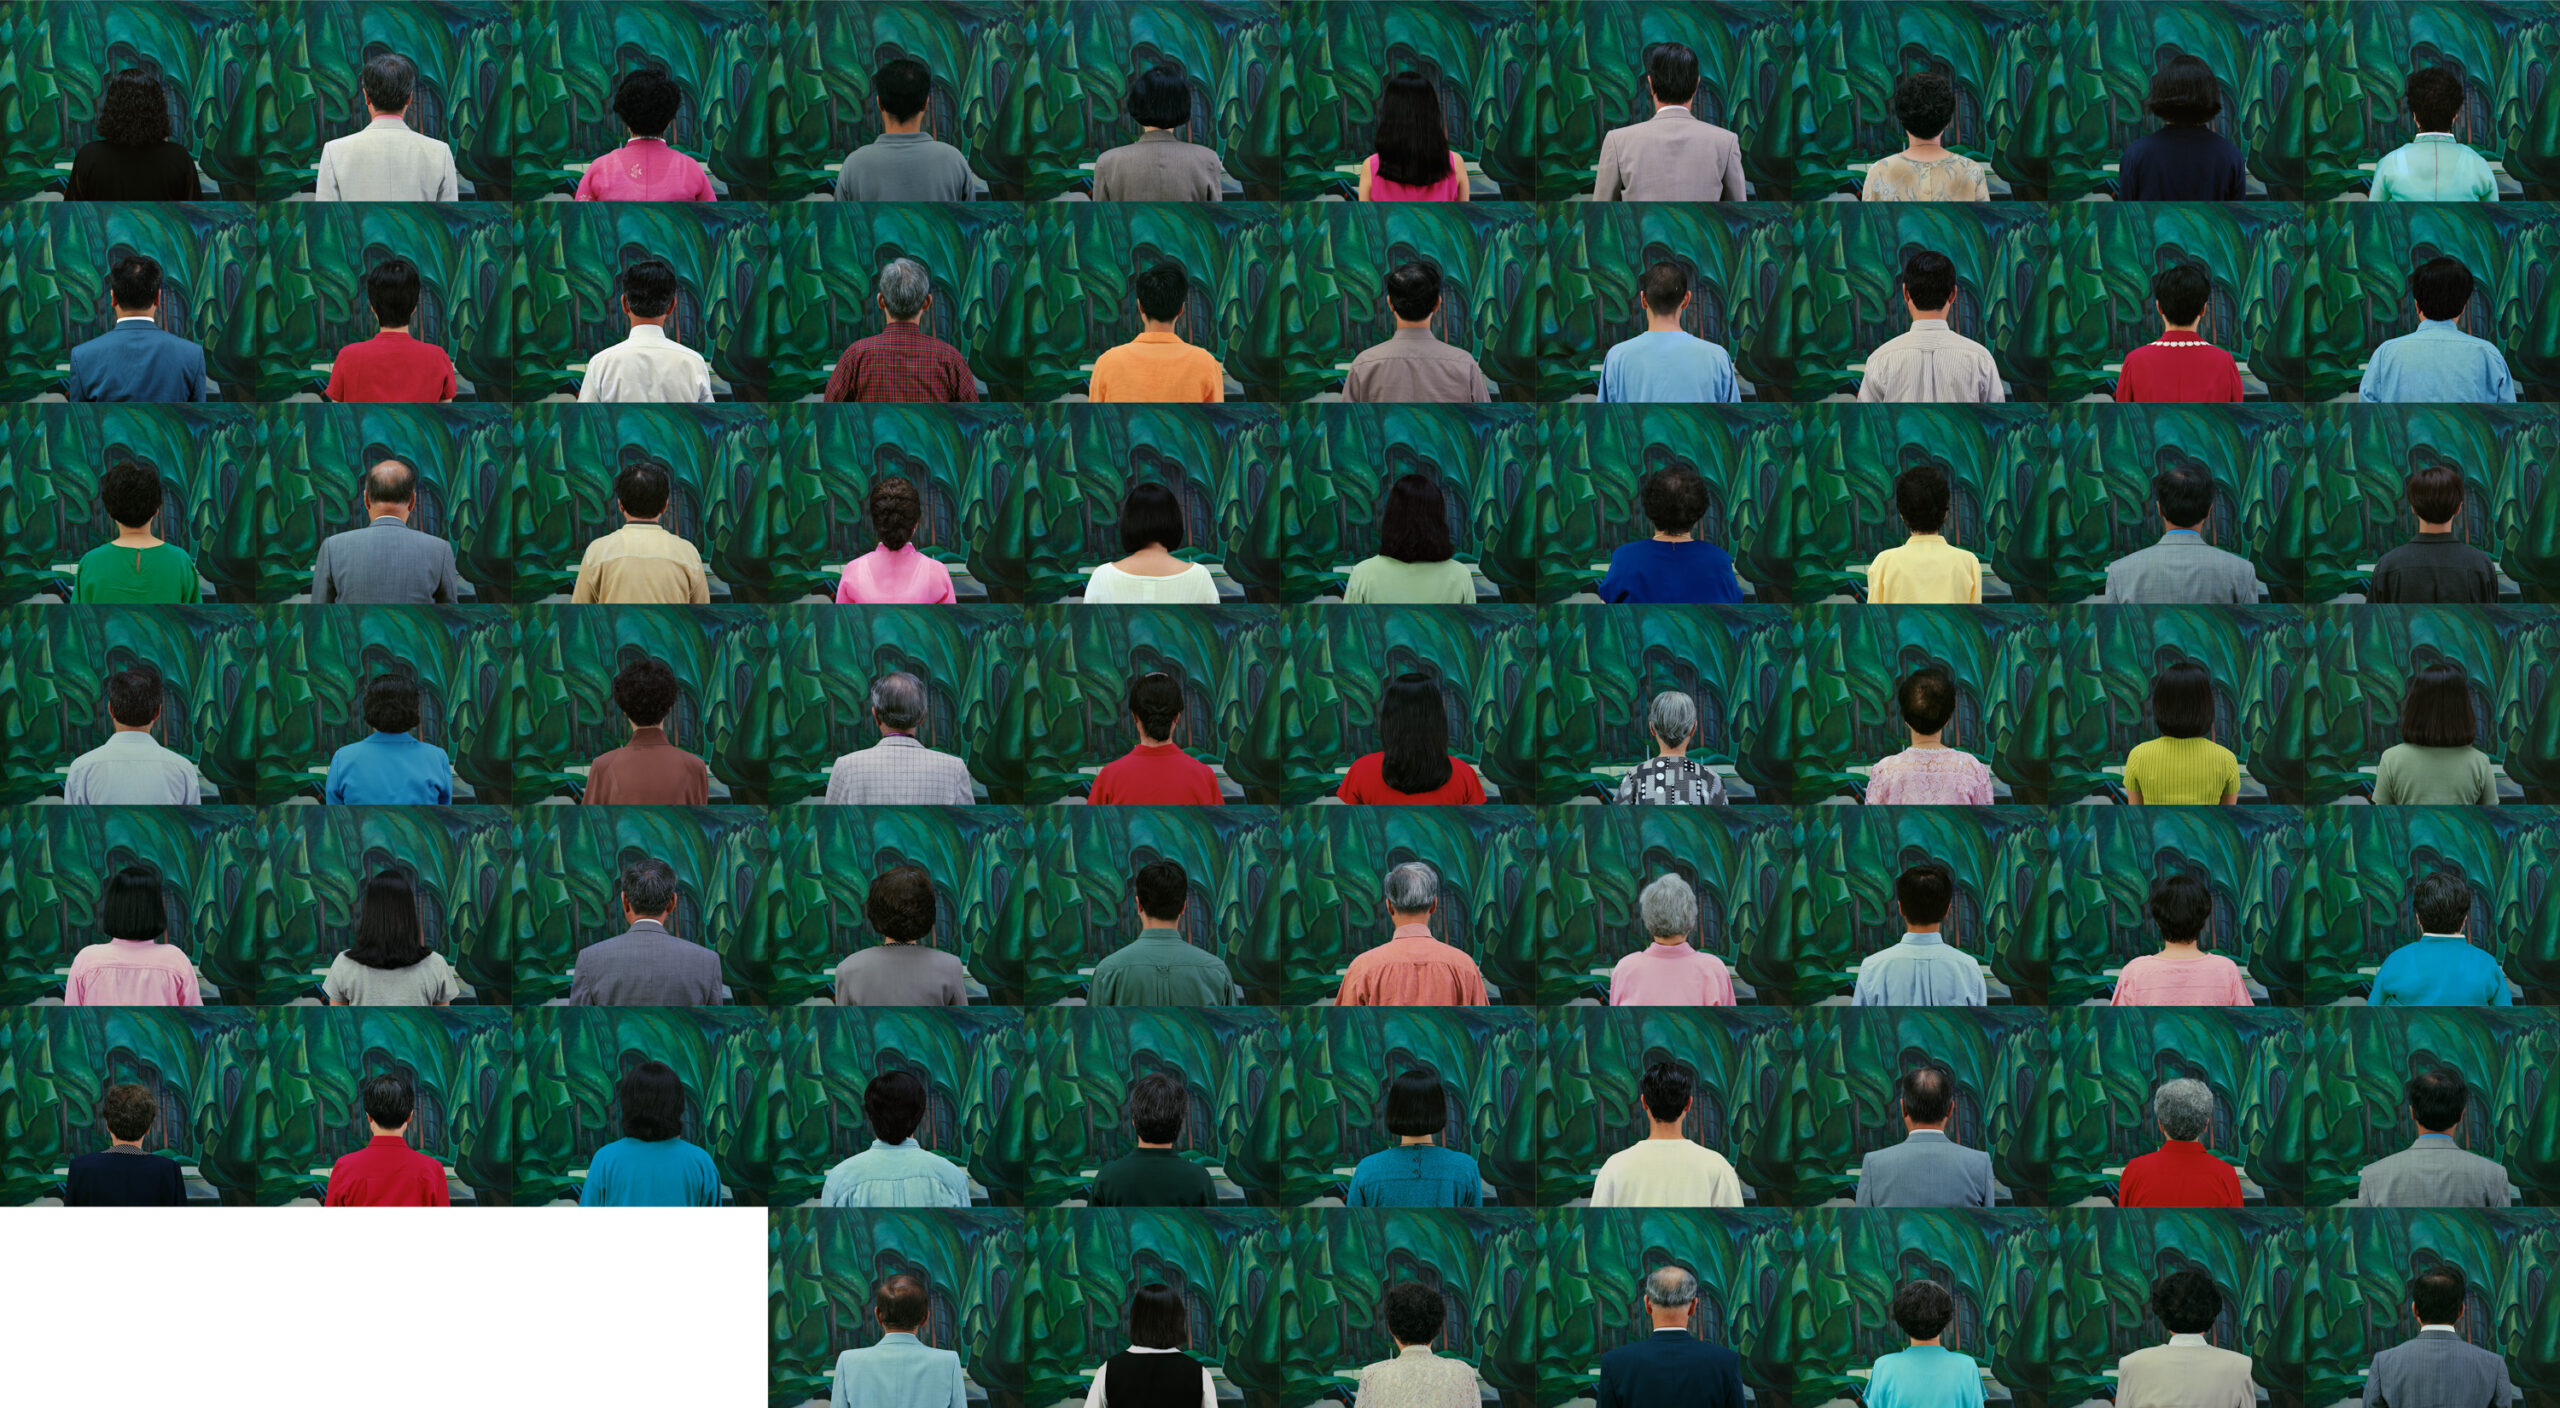     Jin-me Yoon, A Group of Sixty-Seven, 1996 (two grids of 67 framed chromogenic prints for a total of 134 prints and 1 name panel). Collection of the Vancouver Art Gallery, Vancouver Art Gallery Acquisition Fund. Courtesy of the artist

